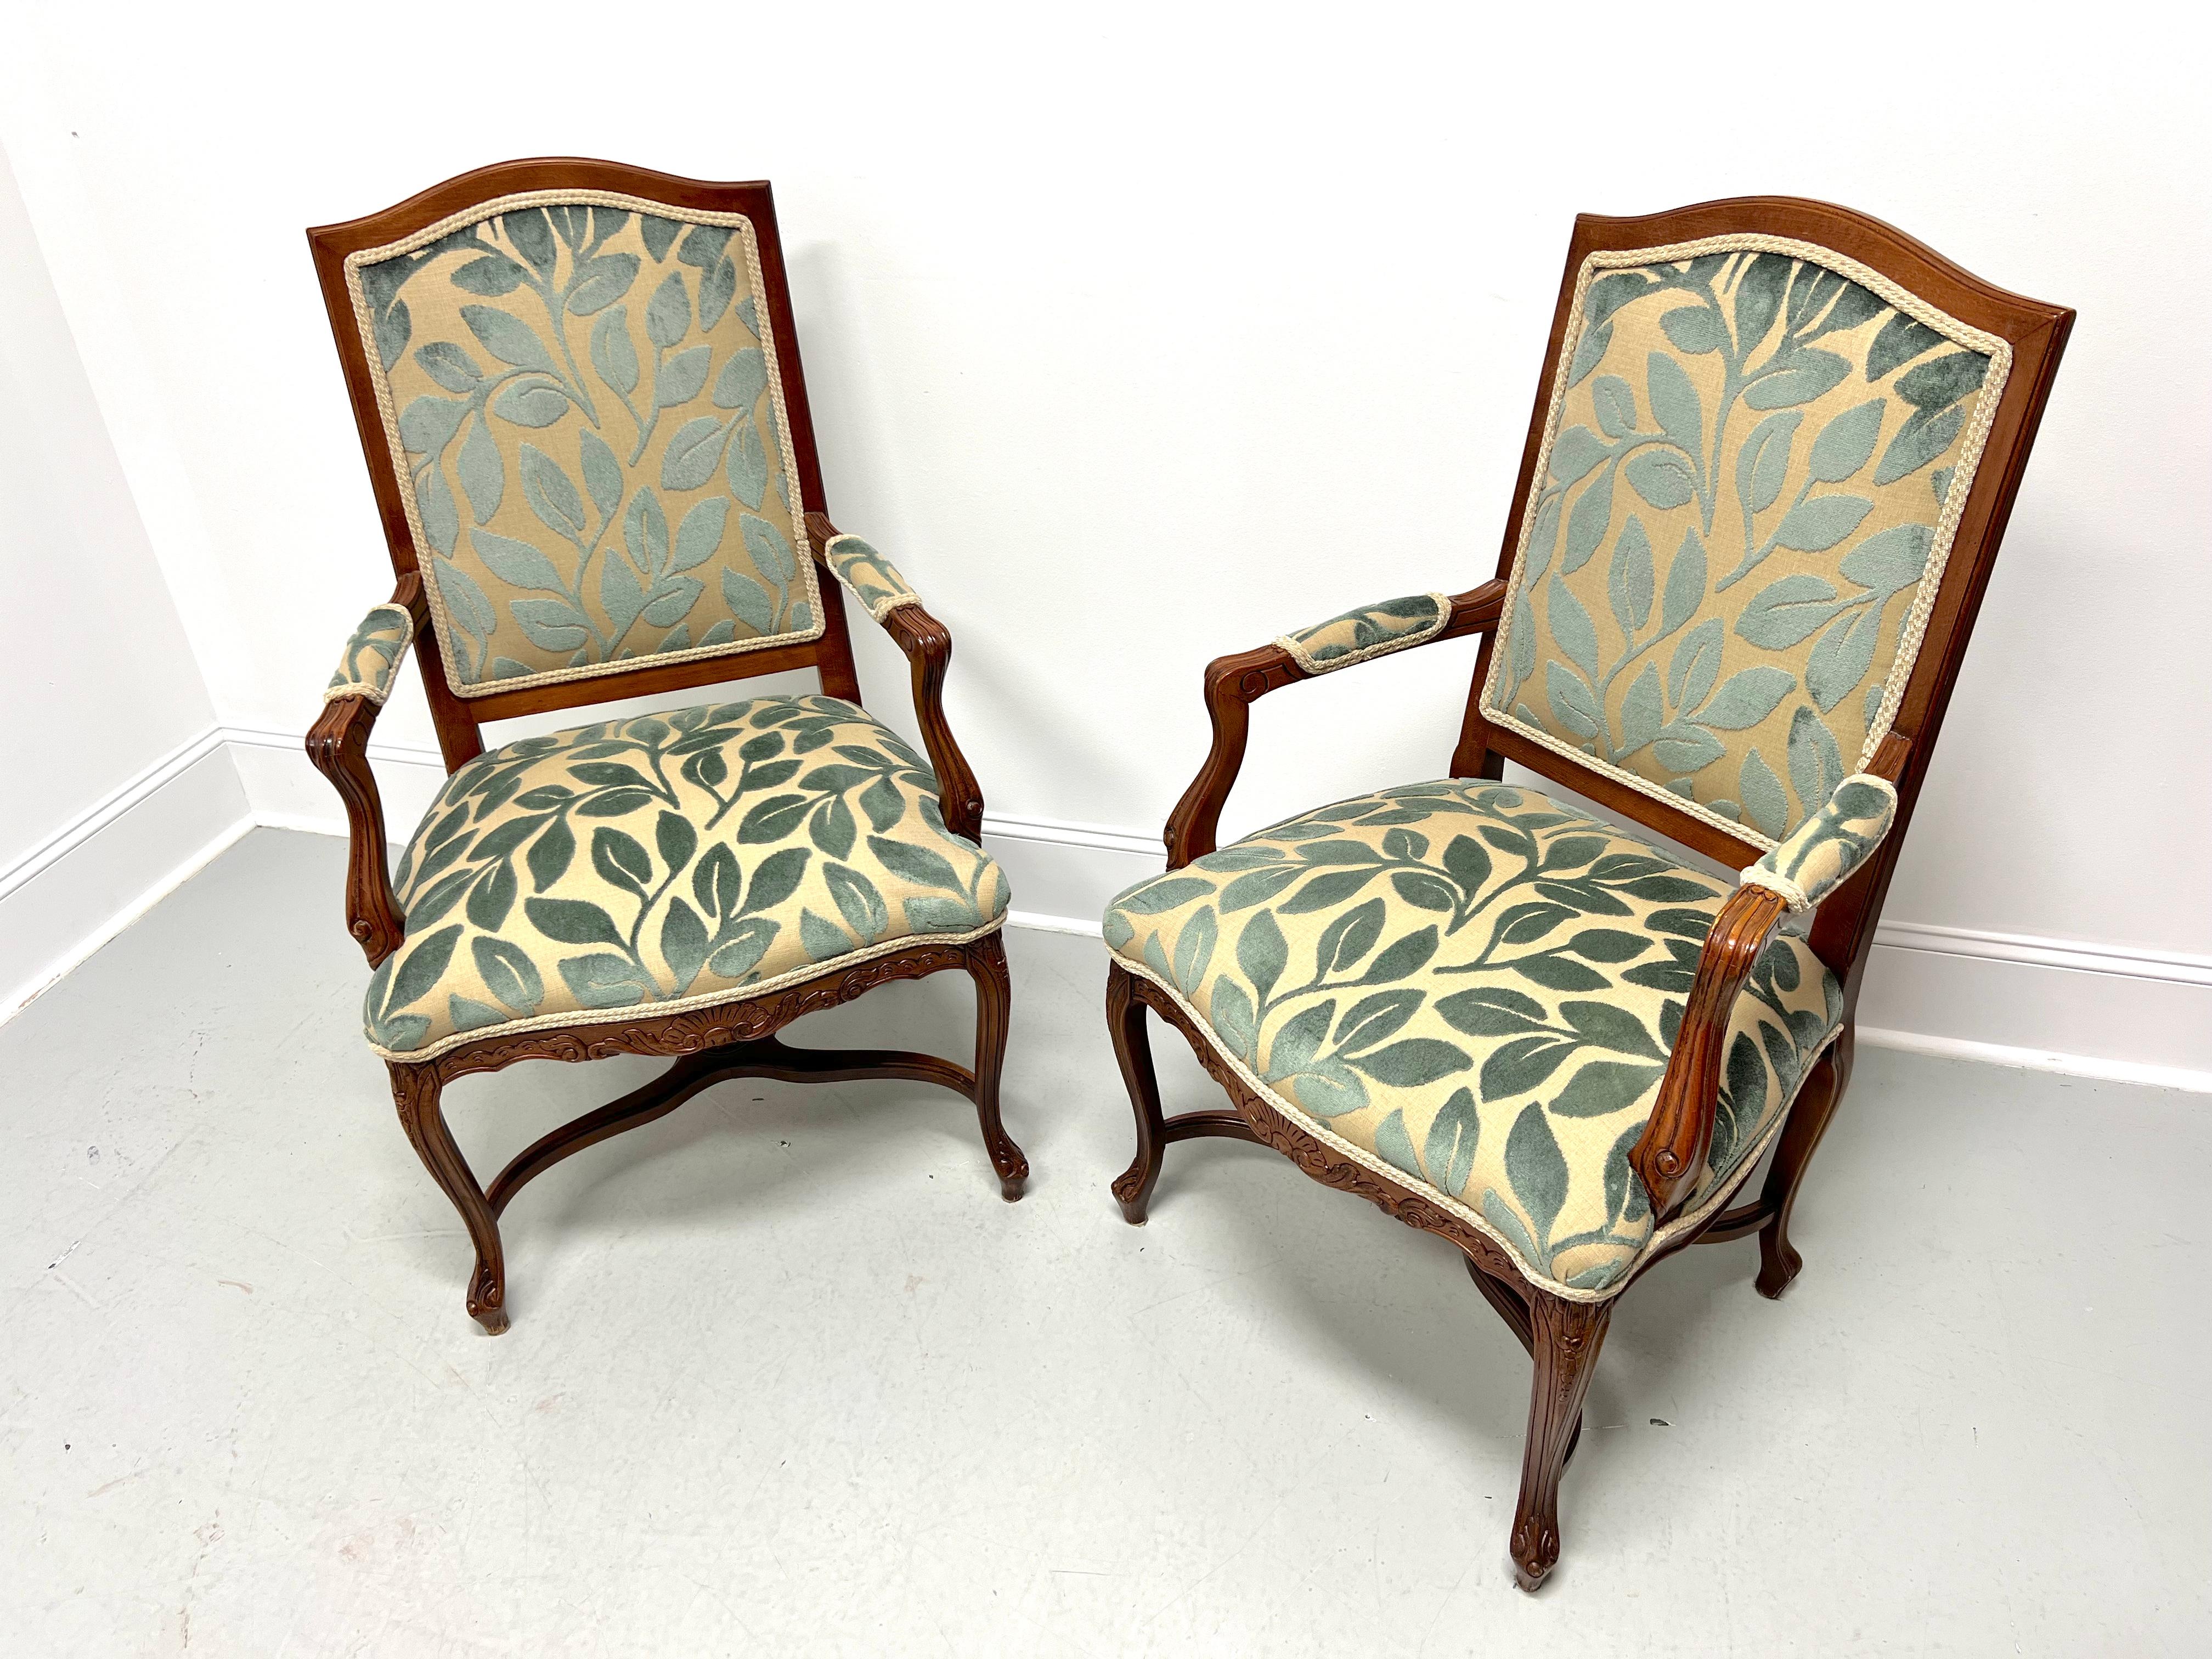 A pair of French Country Louis XV style fauteuils open-arm armchairs, unbranded. Carved walnut frame, curved arms with carved supports, brocade fabric upholstery of teal (green-blue) & silver, carved apron, curved legs, 